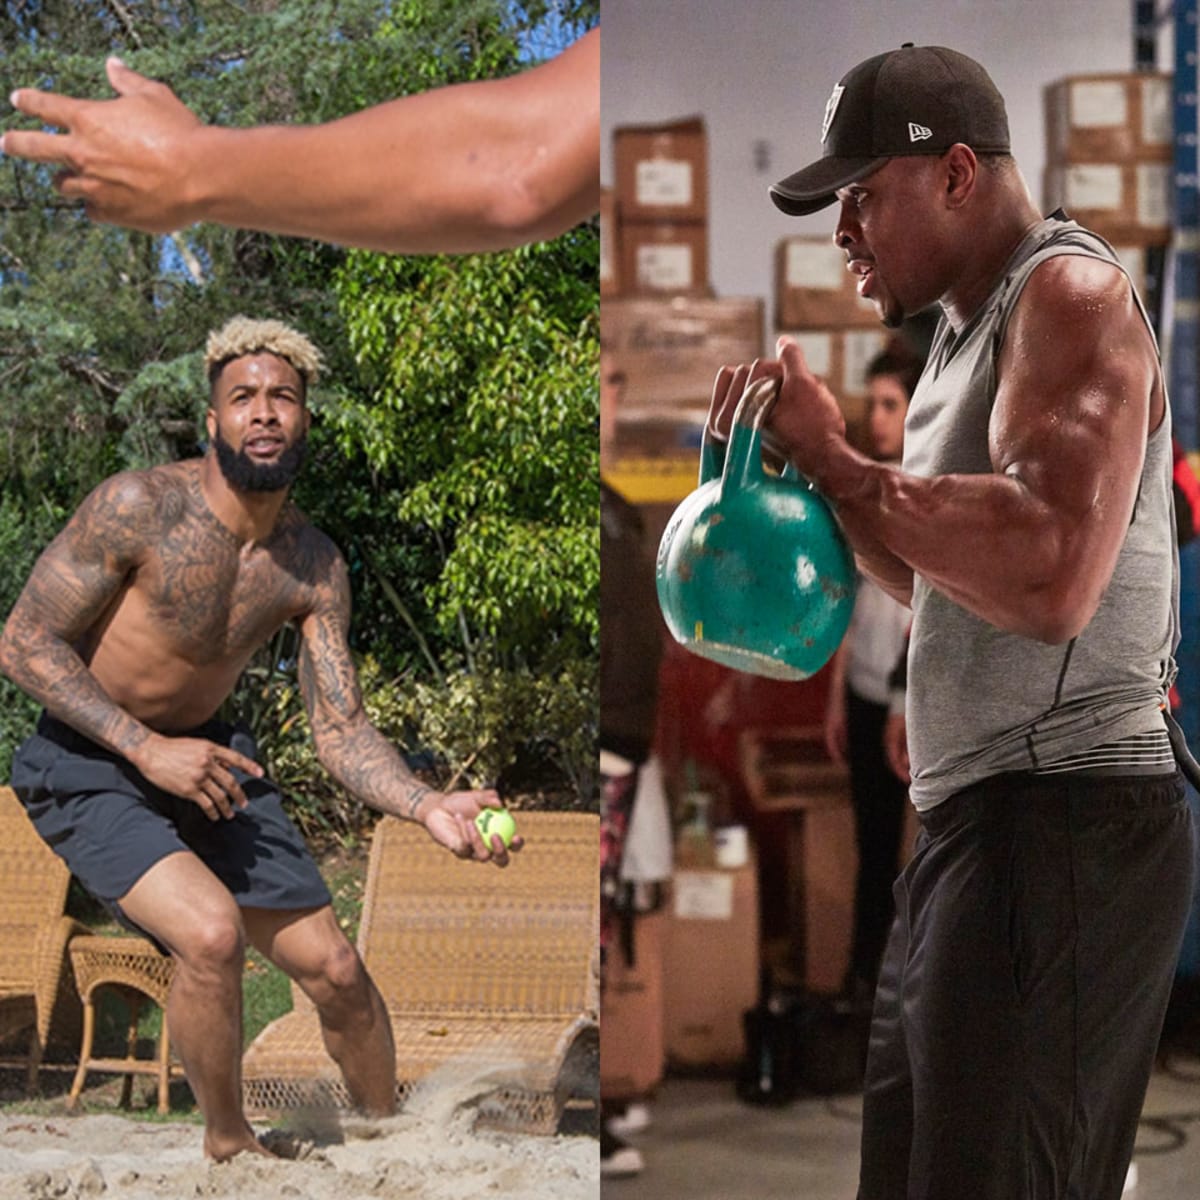 25 Most Jacked Football Players in the NFL 2023